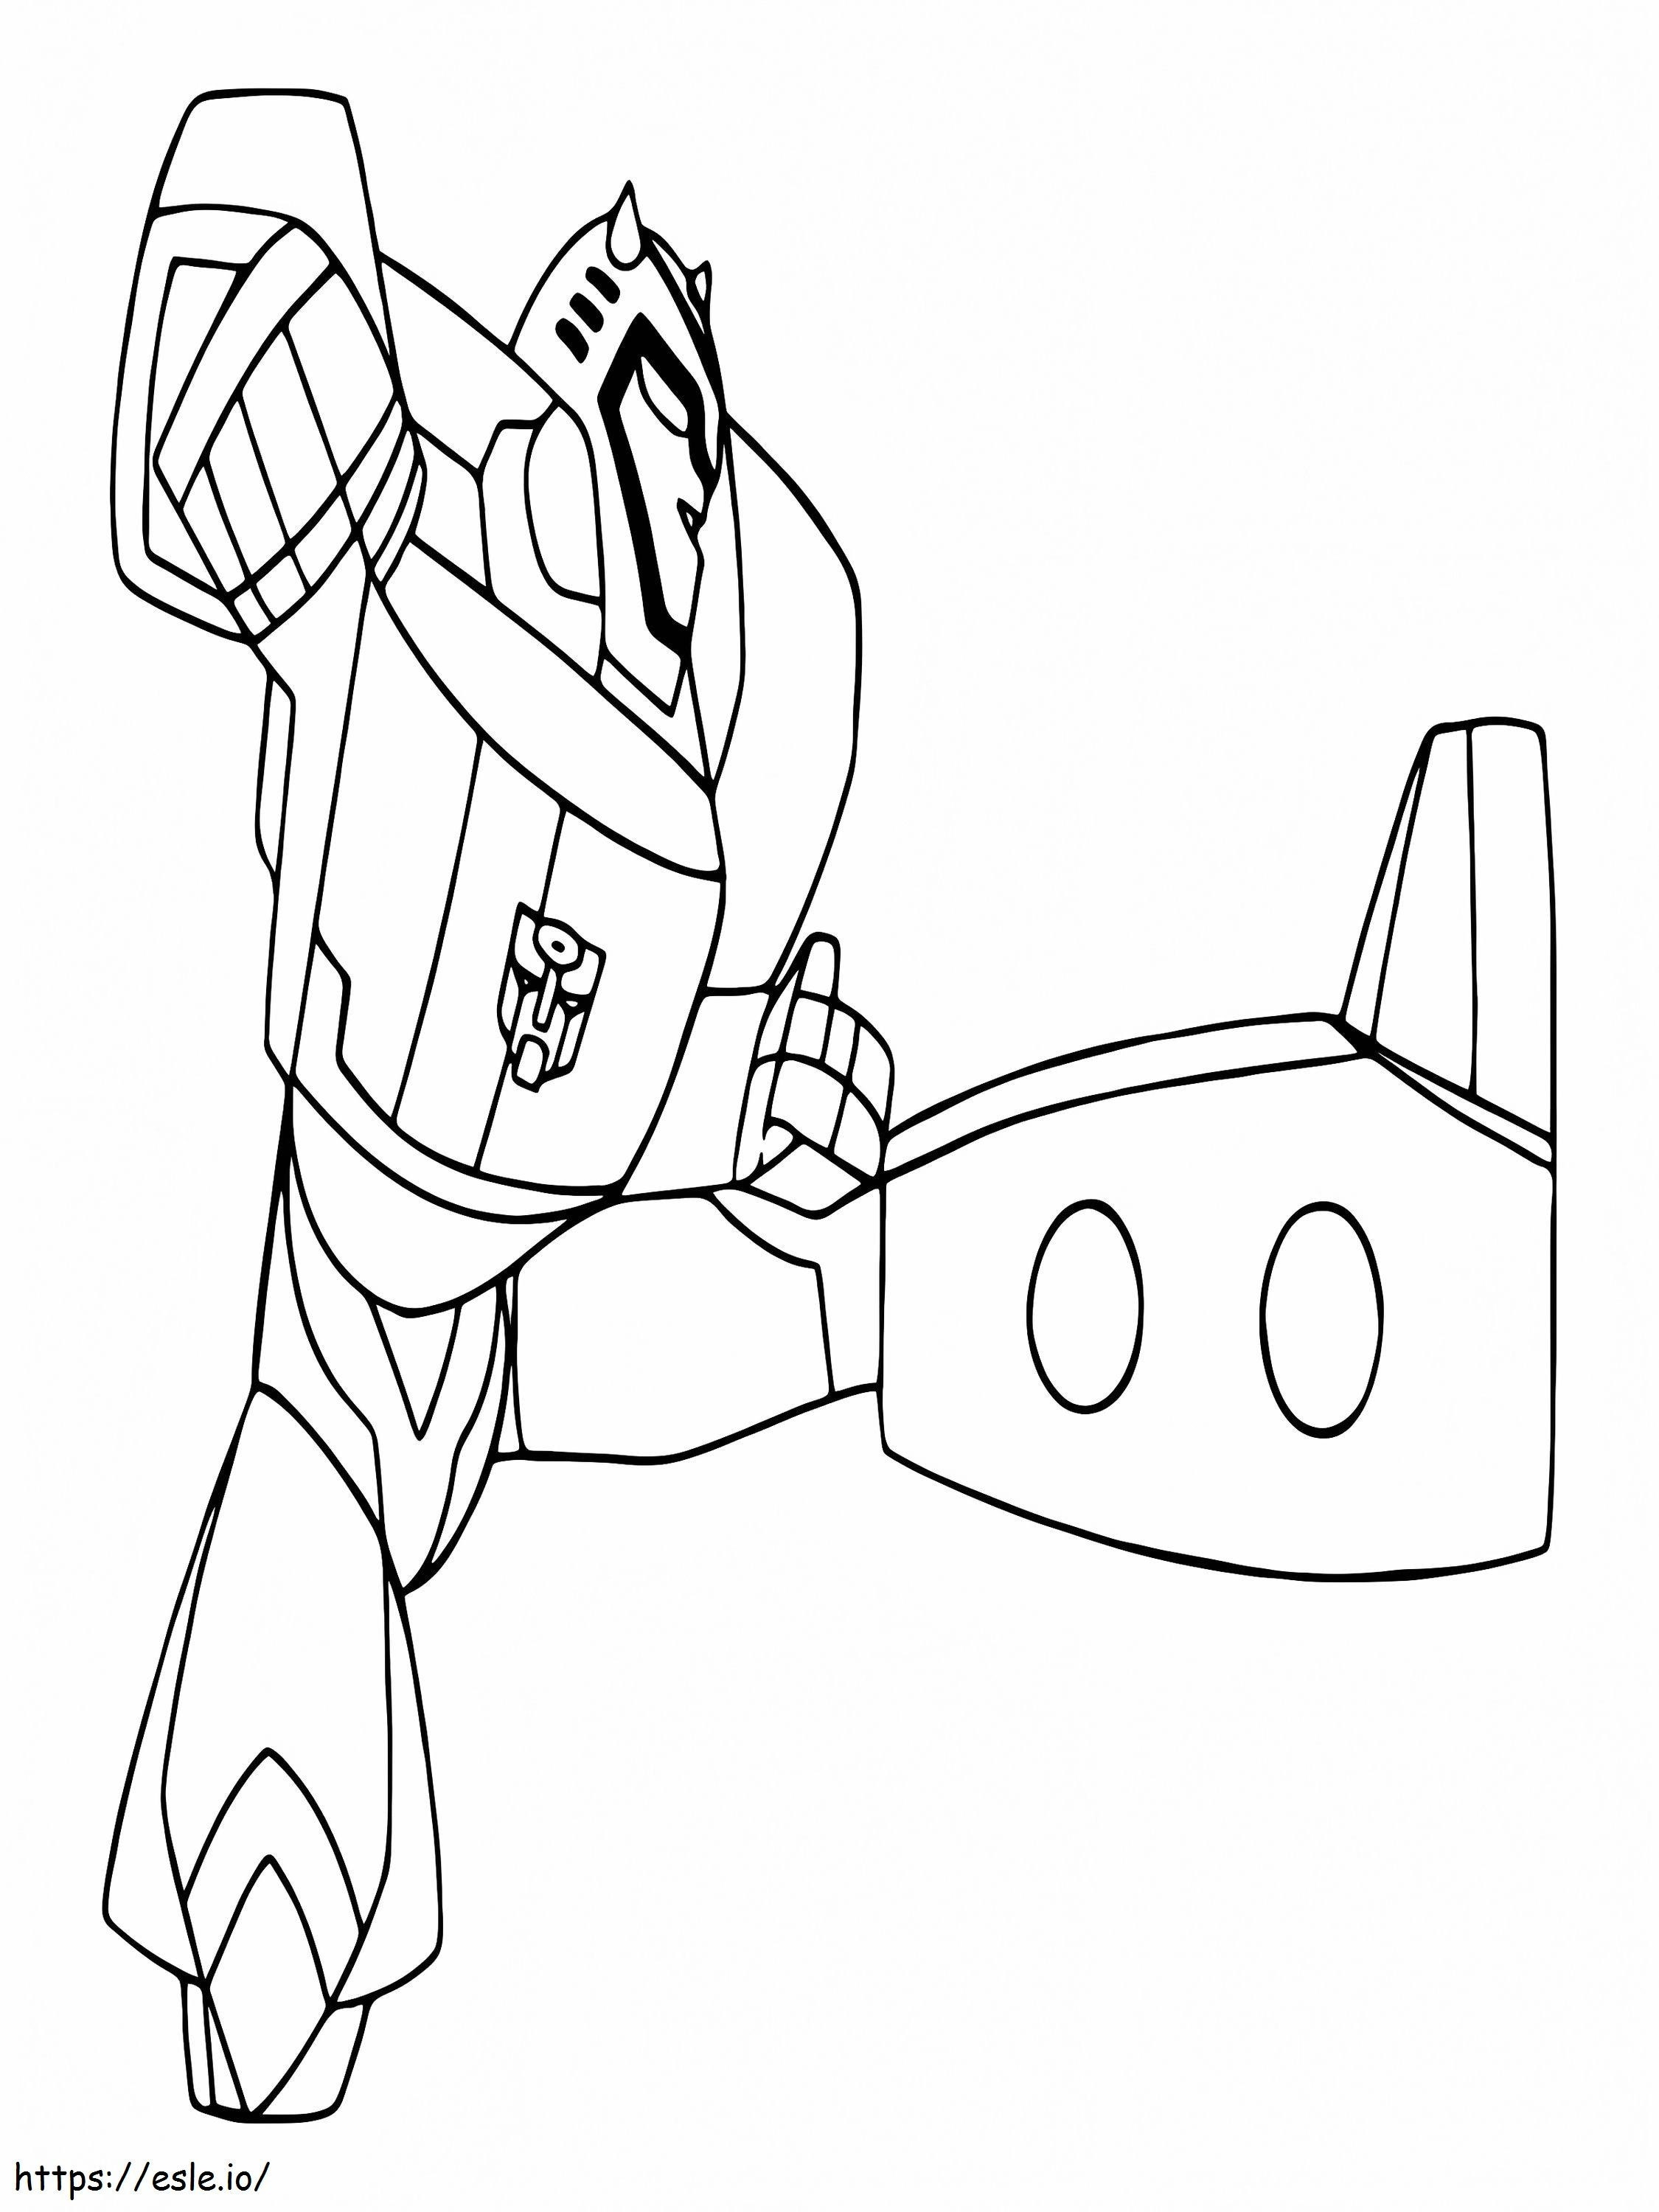 Superstar Bumblebee coloring page